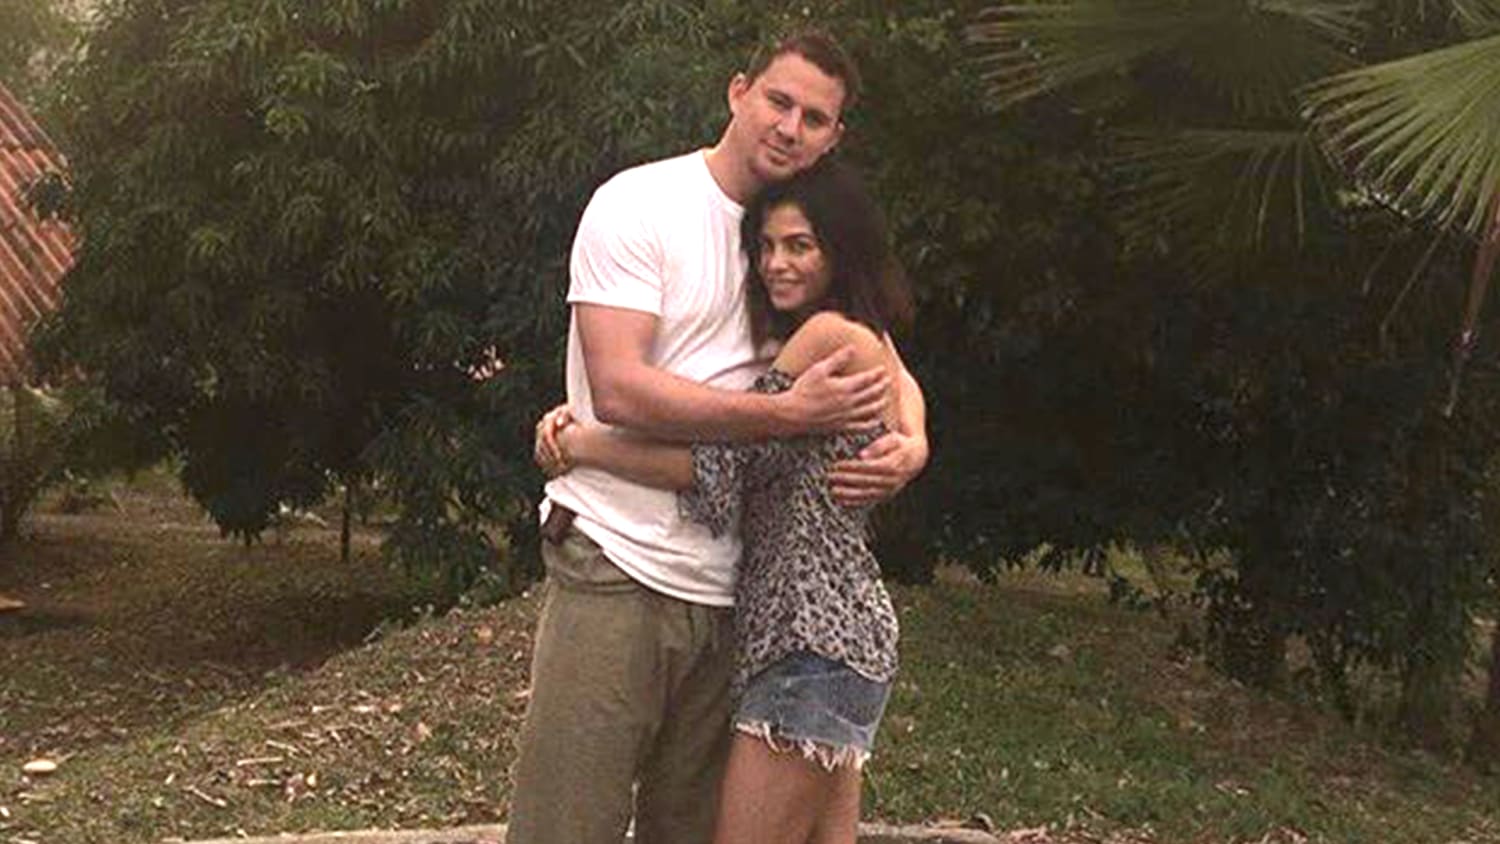 Channing Tatum sends magical birthday message to wife Jenna